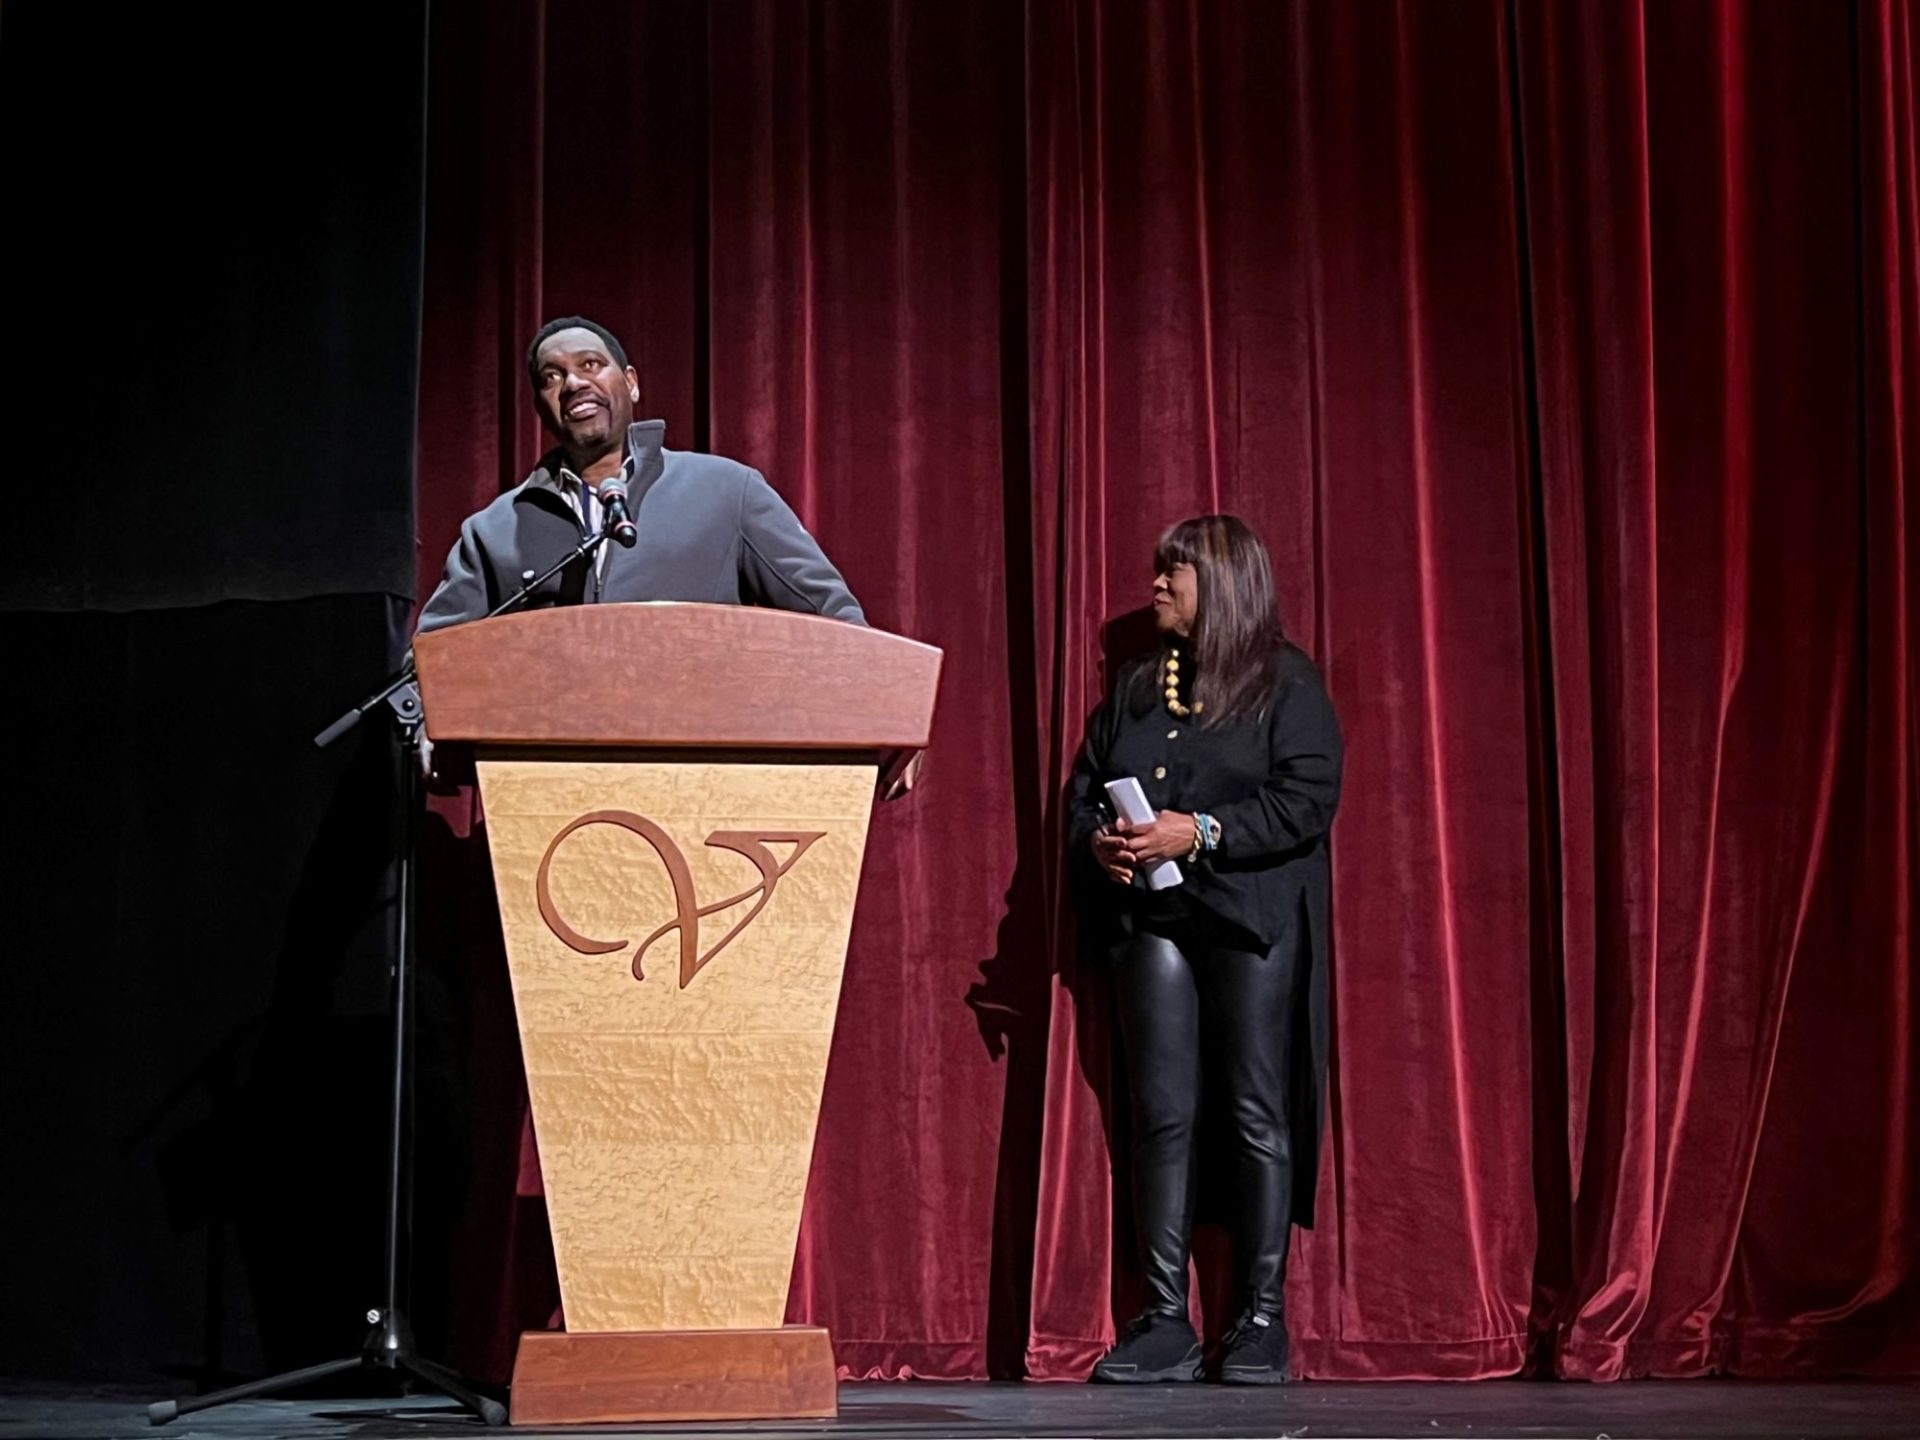 A Black man in a gray sweater is standing behind a wooden podium with a microphone. A Black woman with long brown hair and a black jacket and pants is standing near him, looking to the side.